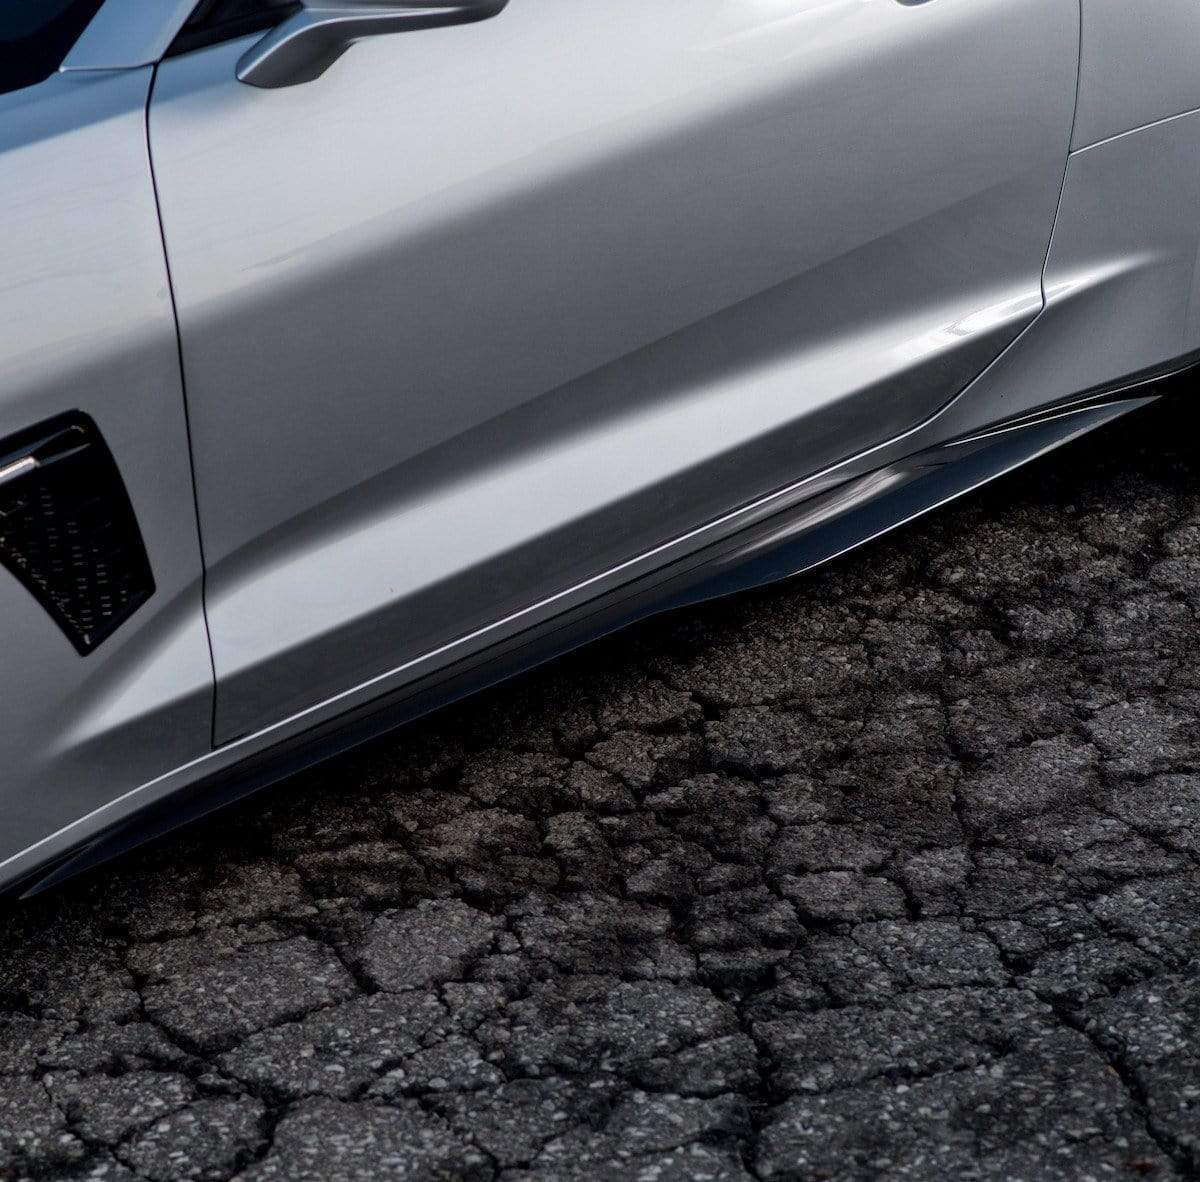 ACS Composite ZL1 Side Rockers for Camaro 2016+, SKU 48-4-039 - Aerodynamic and stylish side skirts for added protection and enhanced control.